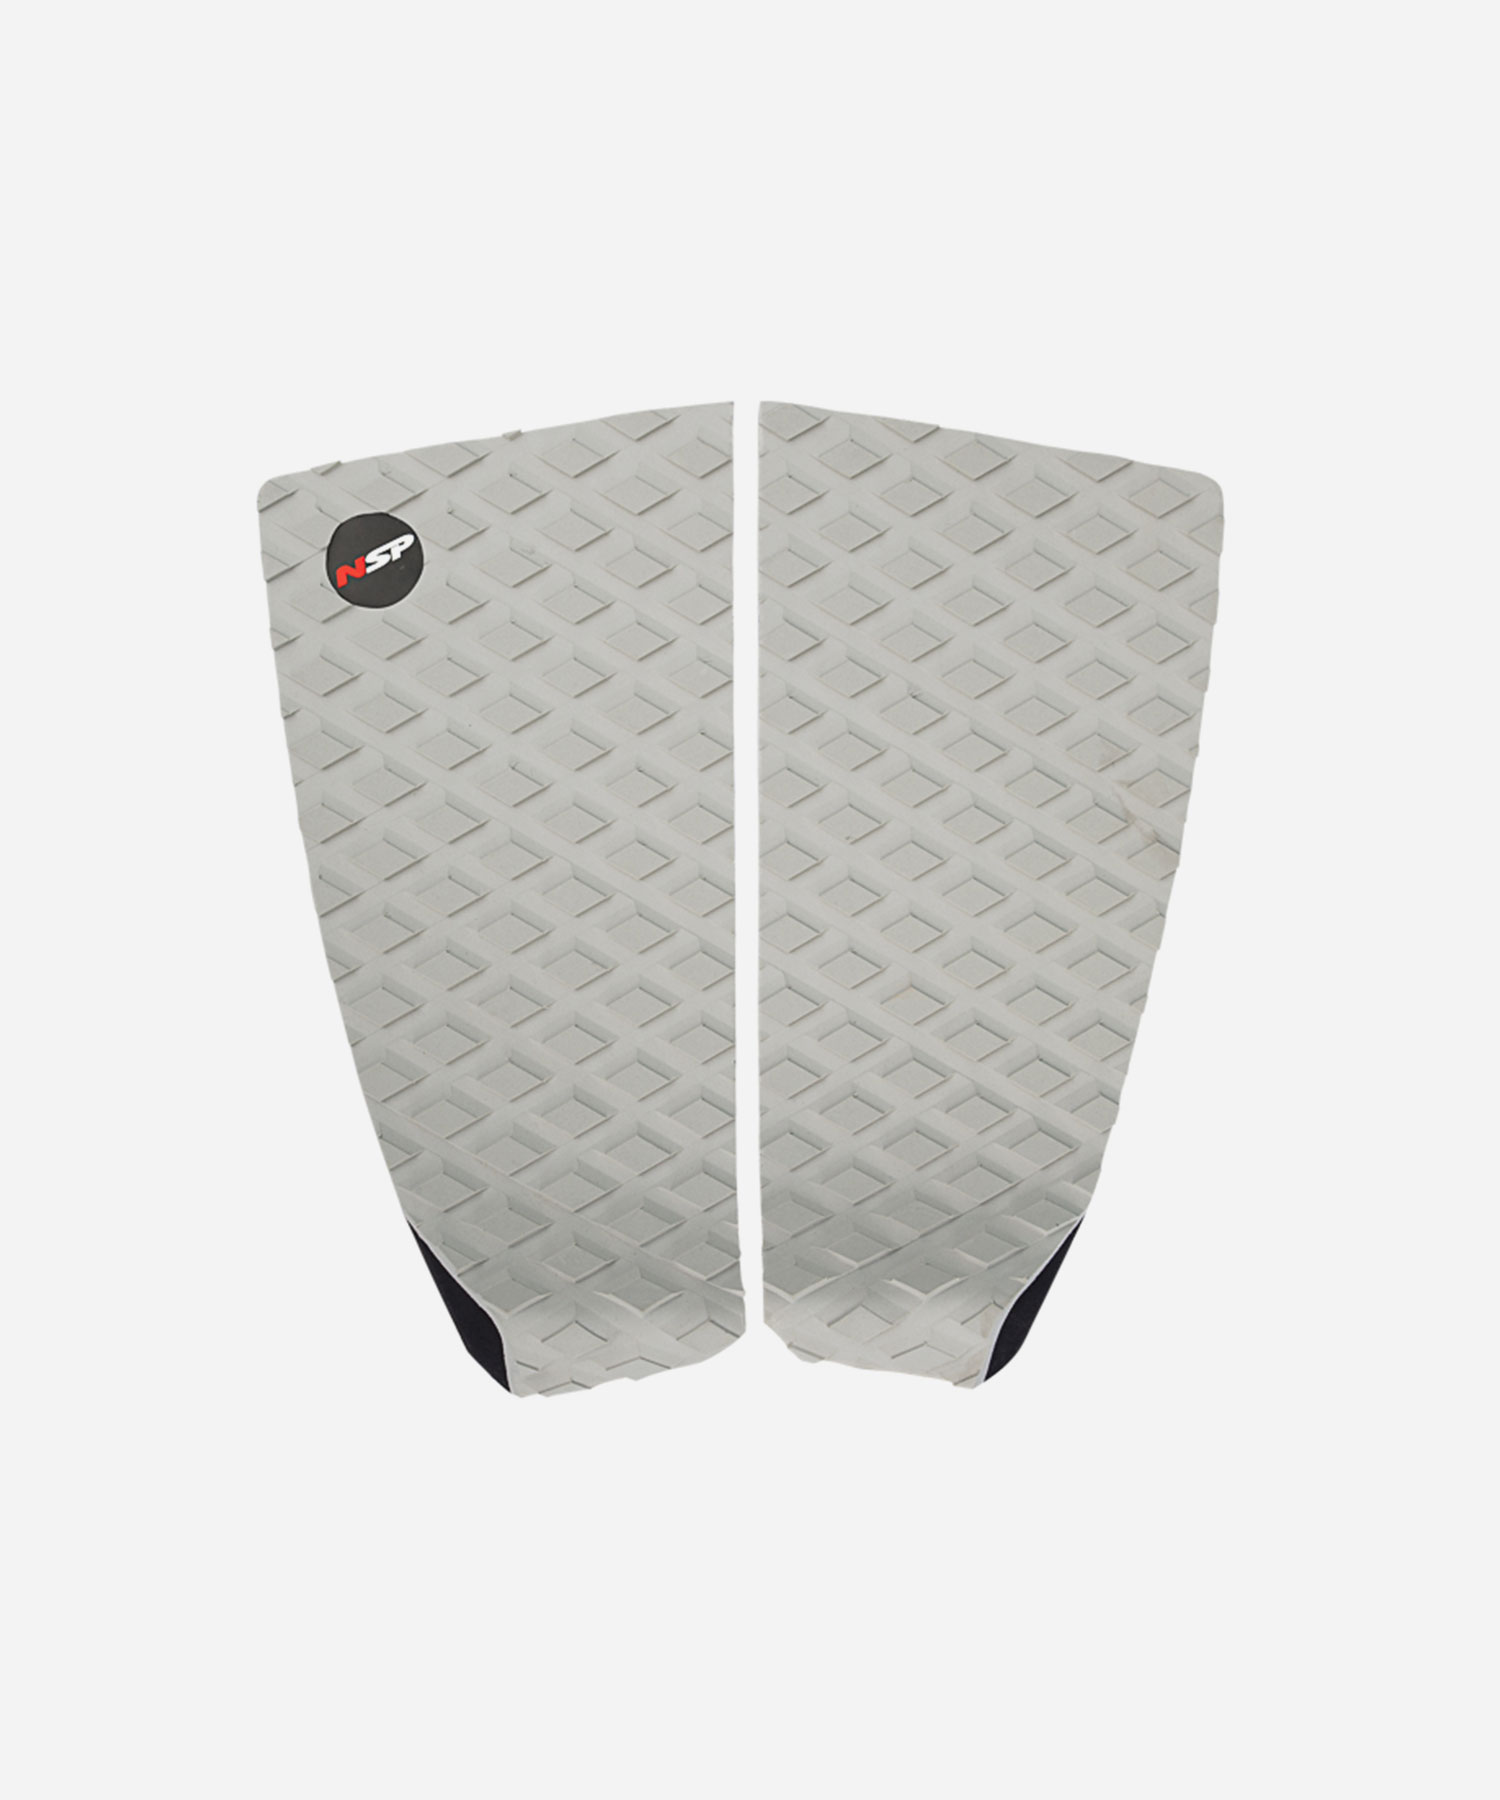 NSP SUP 트랙션 테일 패드 - NACC0806 NSP 2 Piece Recycled Traction Tail Pad 패들보드